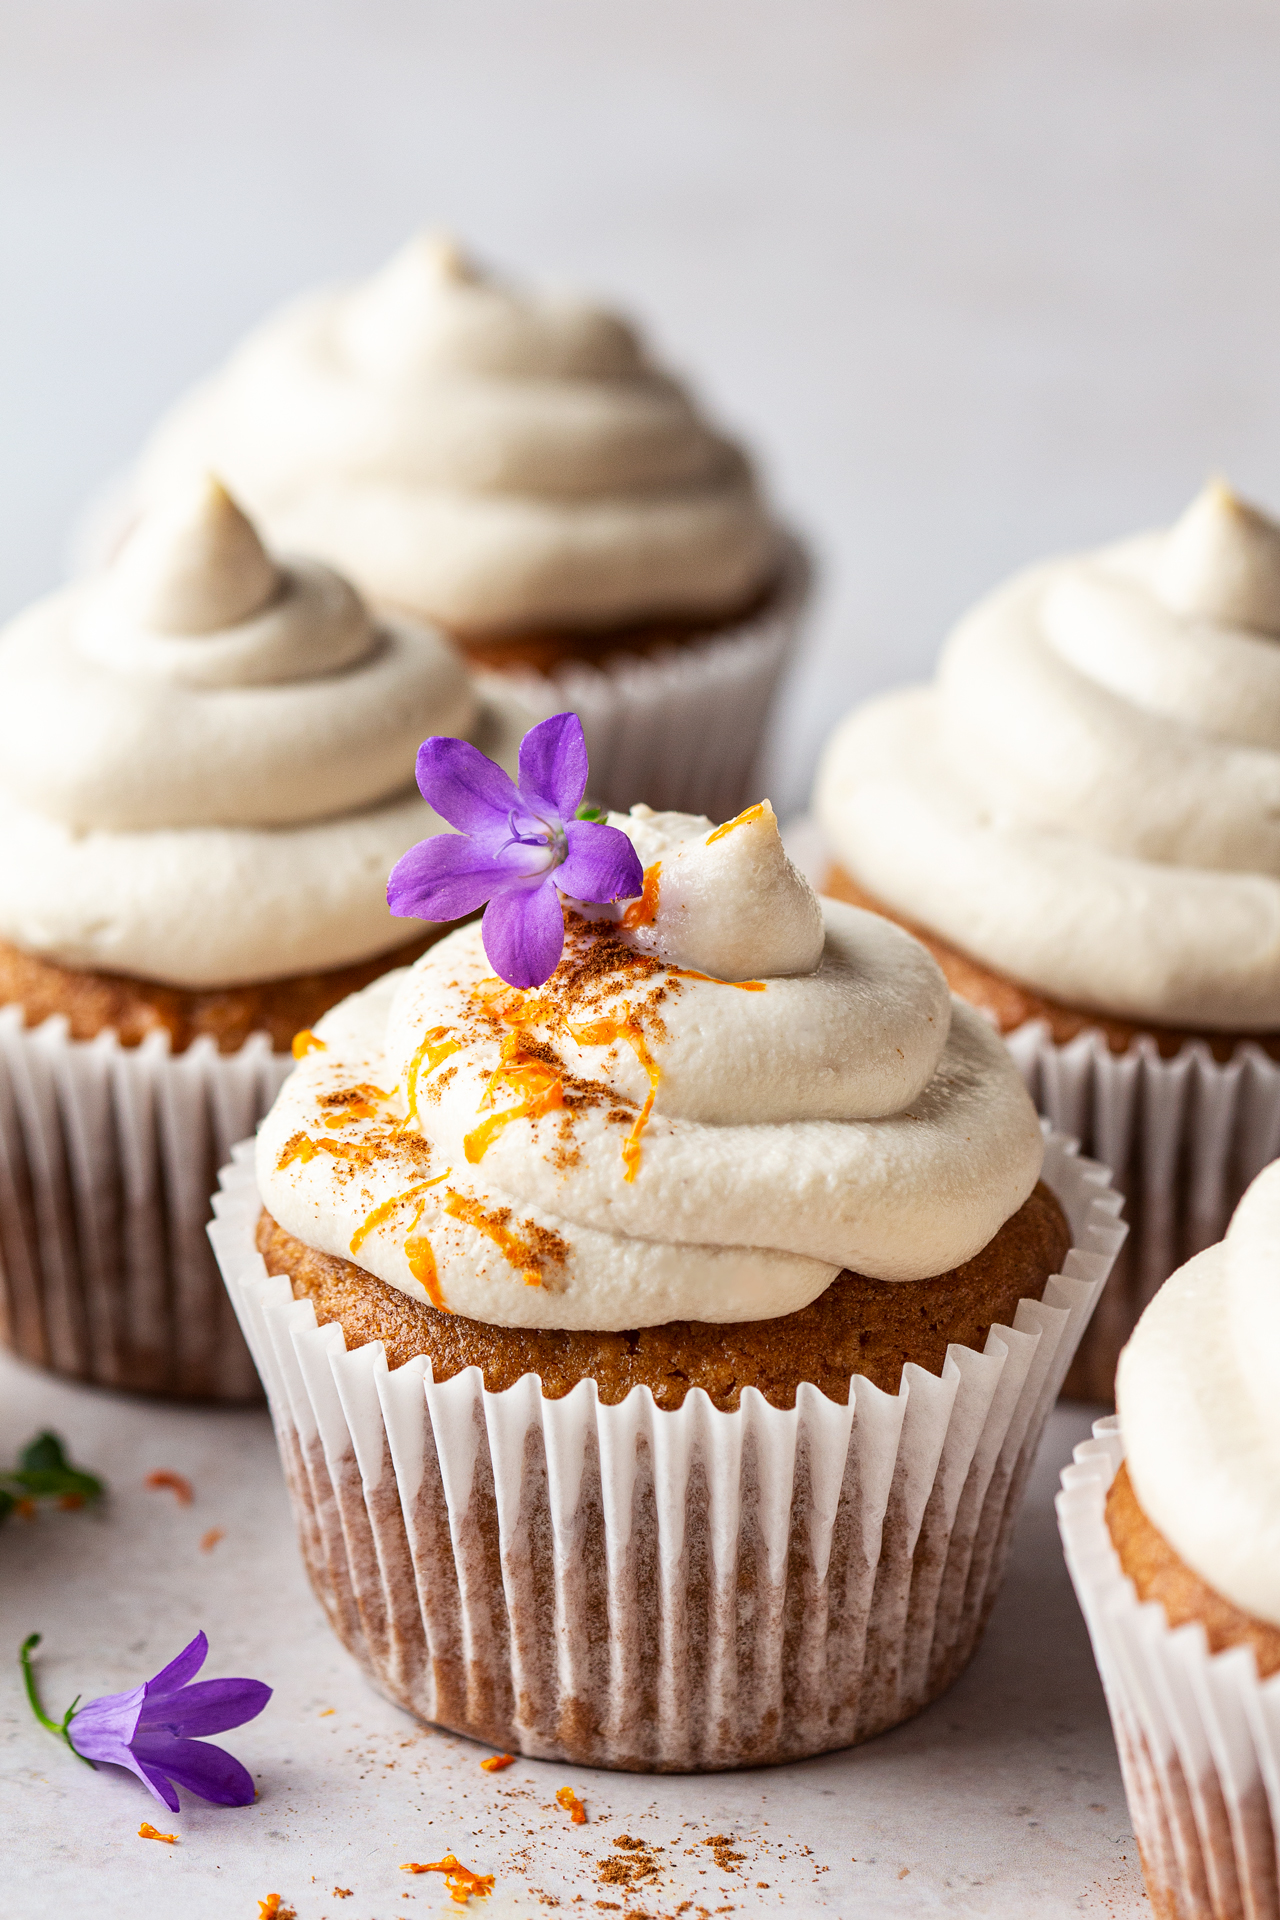 Vegan carrot cupcakes with cashew frosting - Lazy Cat Kitchen